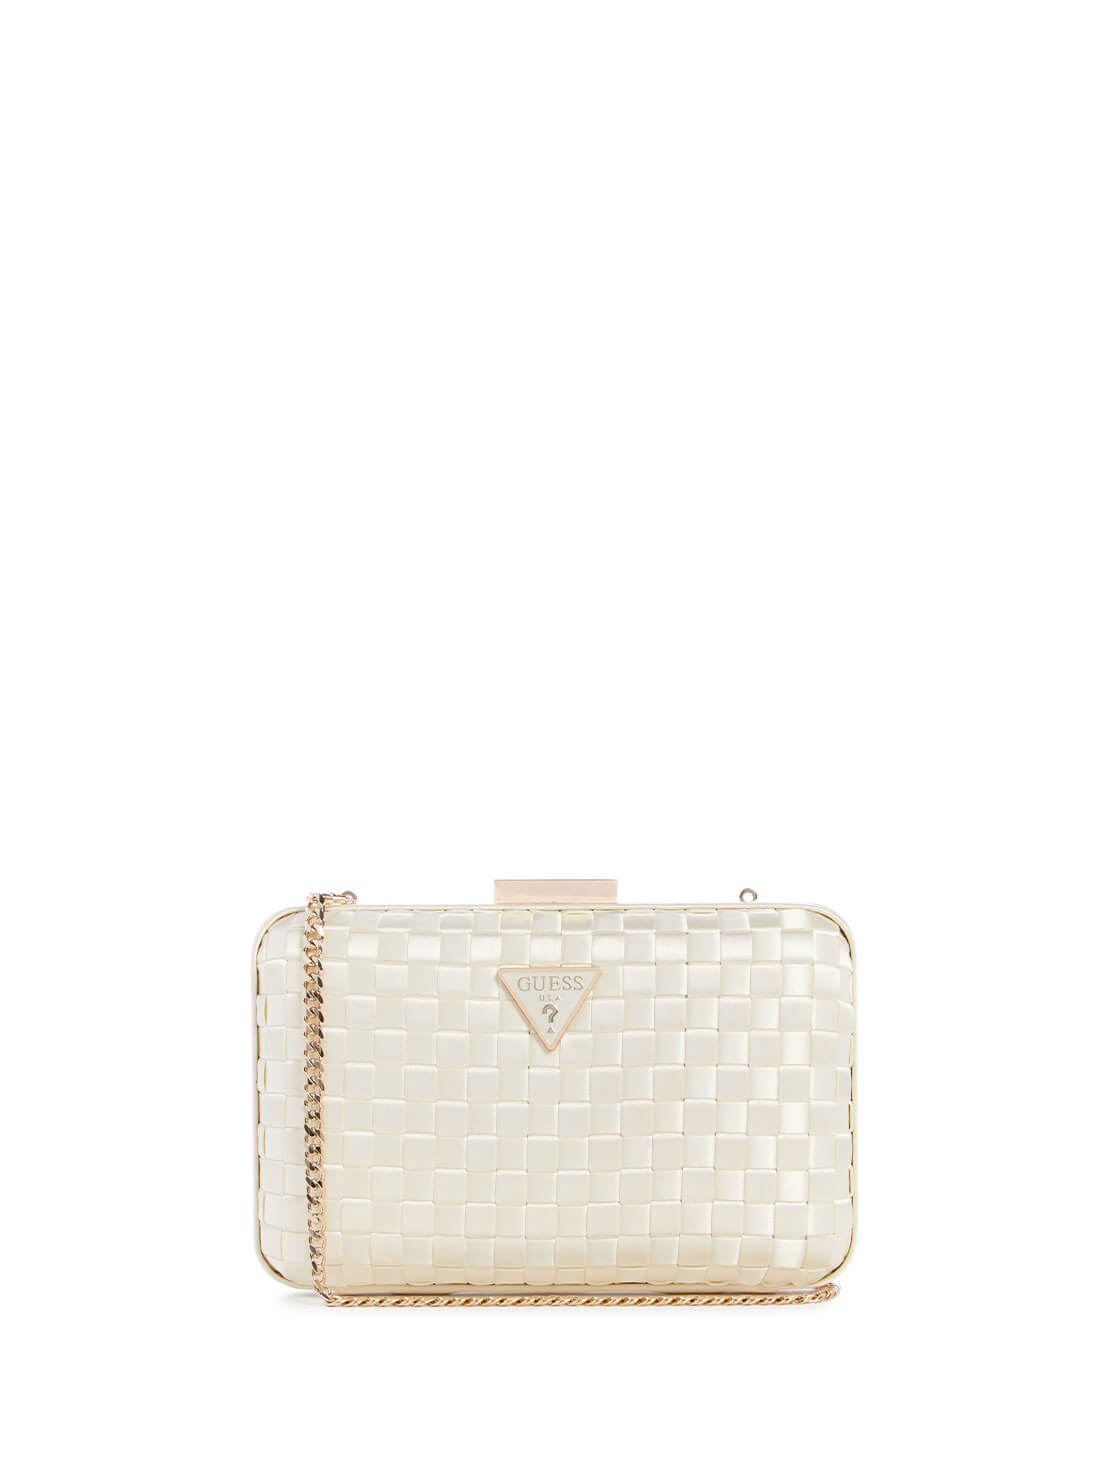 GUESS White Twiller Minaudiere Clutch Bag front view